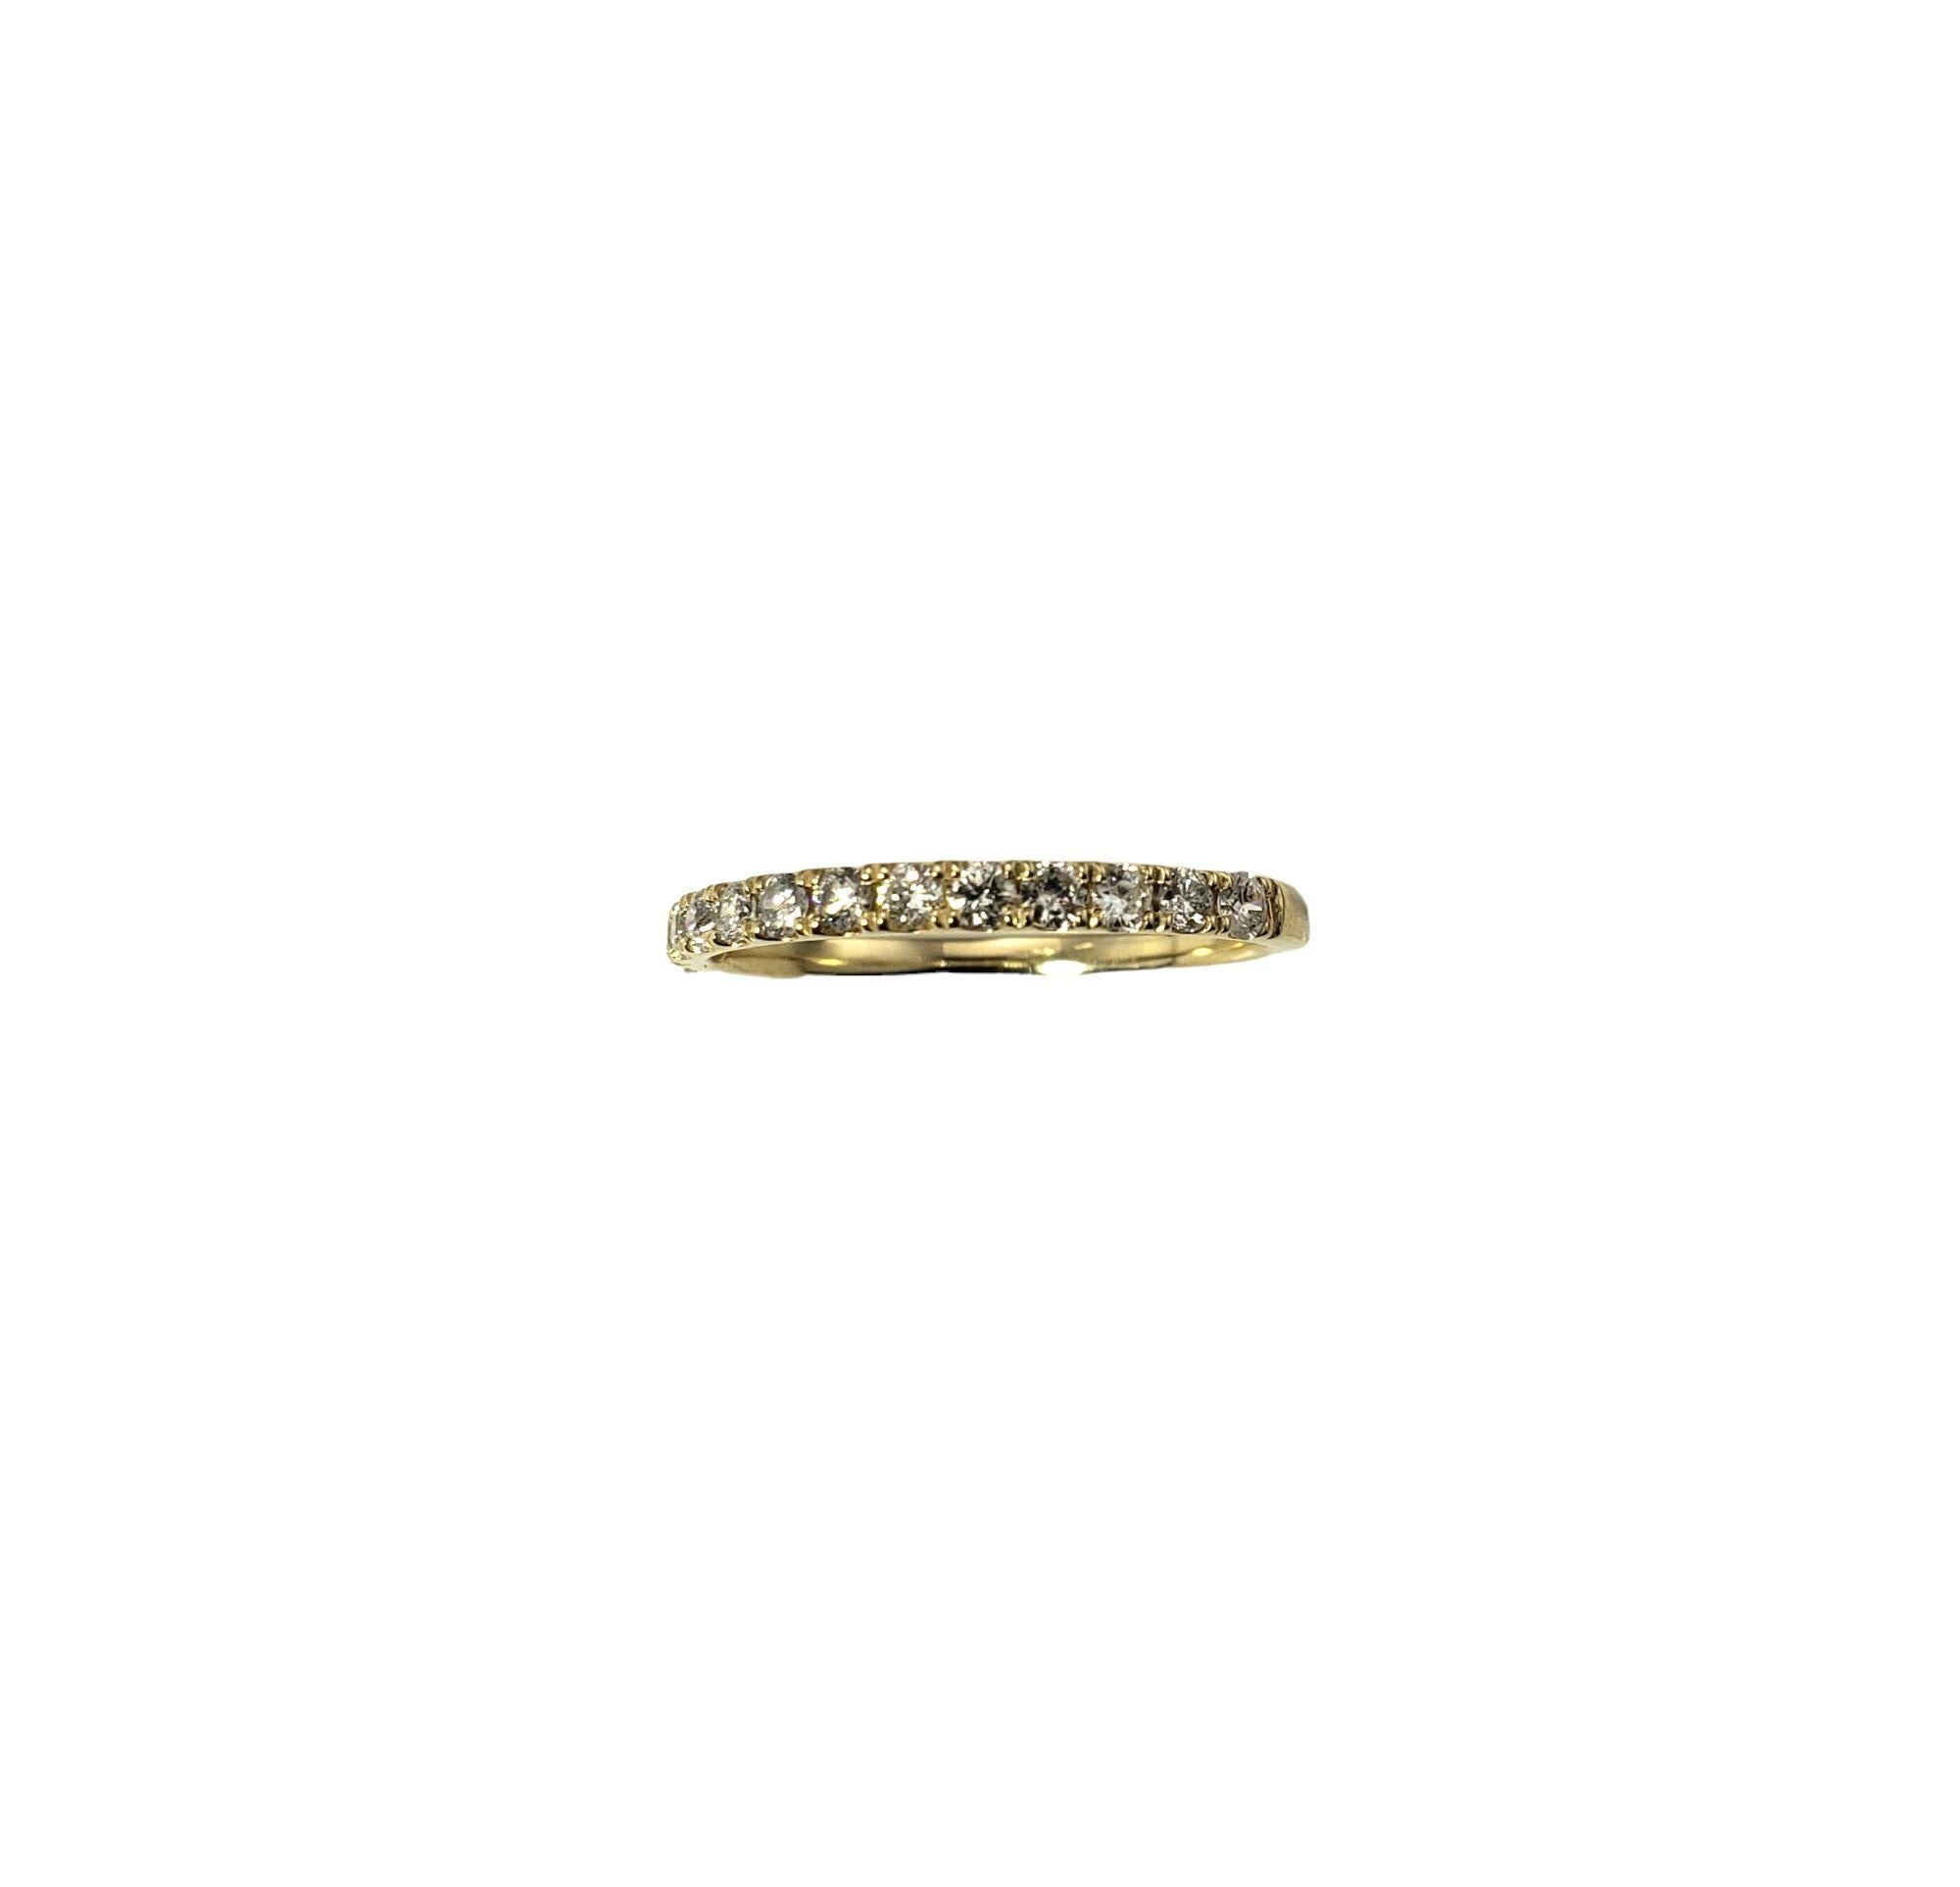 Vintage 14 Karat Yellow Gold Diamond Band Ring Size 6.75-

This sparkling band features 13 round brilliant cut diamonds set in classic 14K yellow gold. Width: 2 mm.

Approximate total diamond weight: .39 ct.

Diamond clarity: I1-I2

Diamond color: